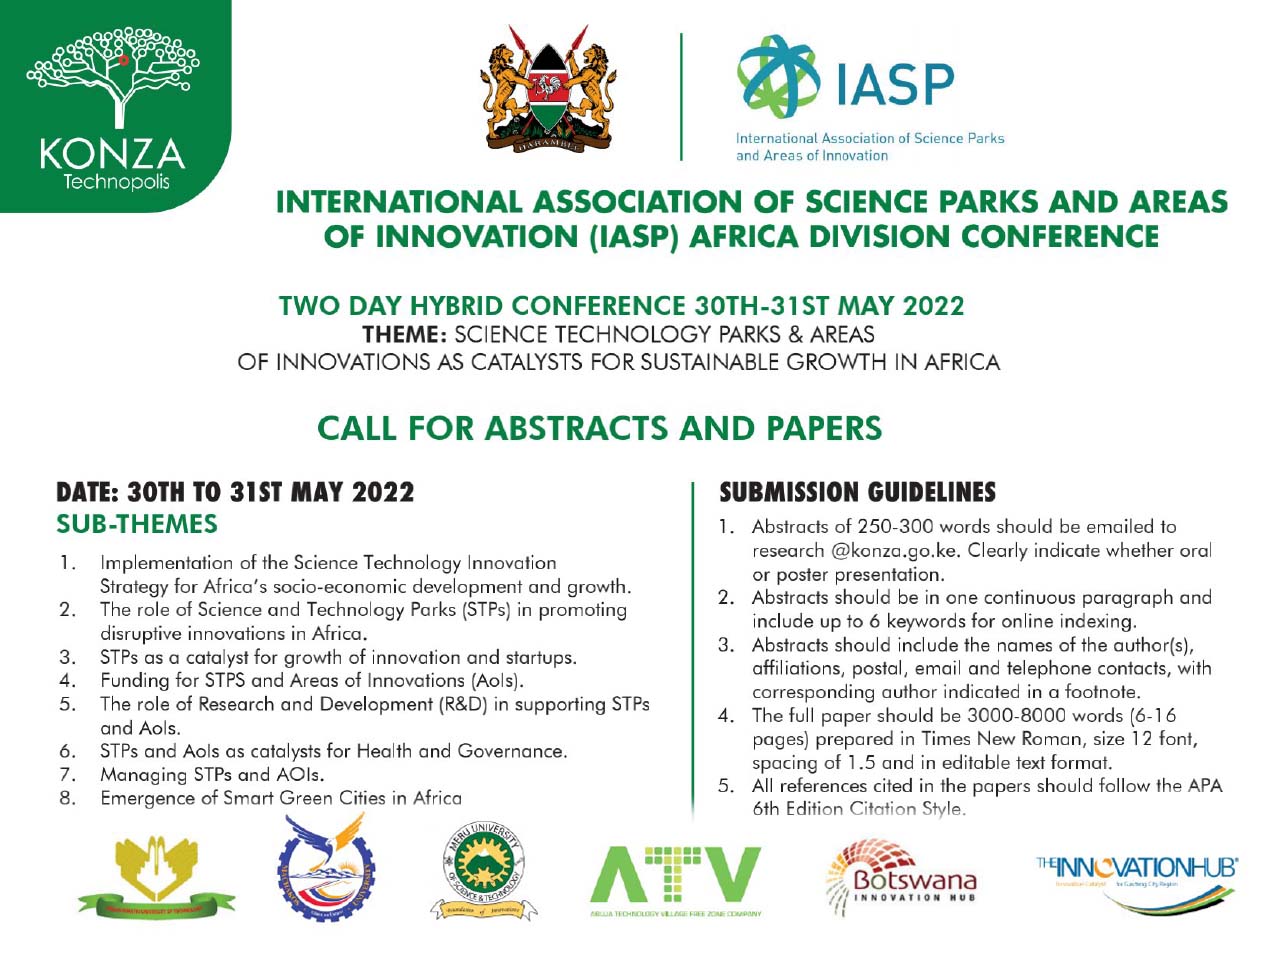 International Association of Science Parks and areas of Innovation (IASP) Africa Division Conference